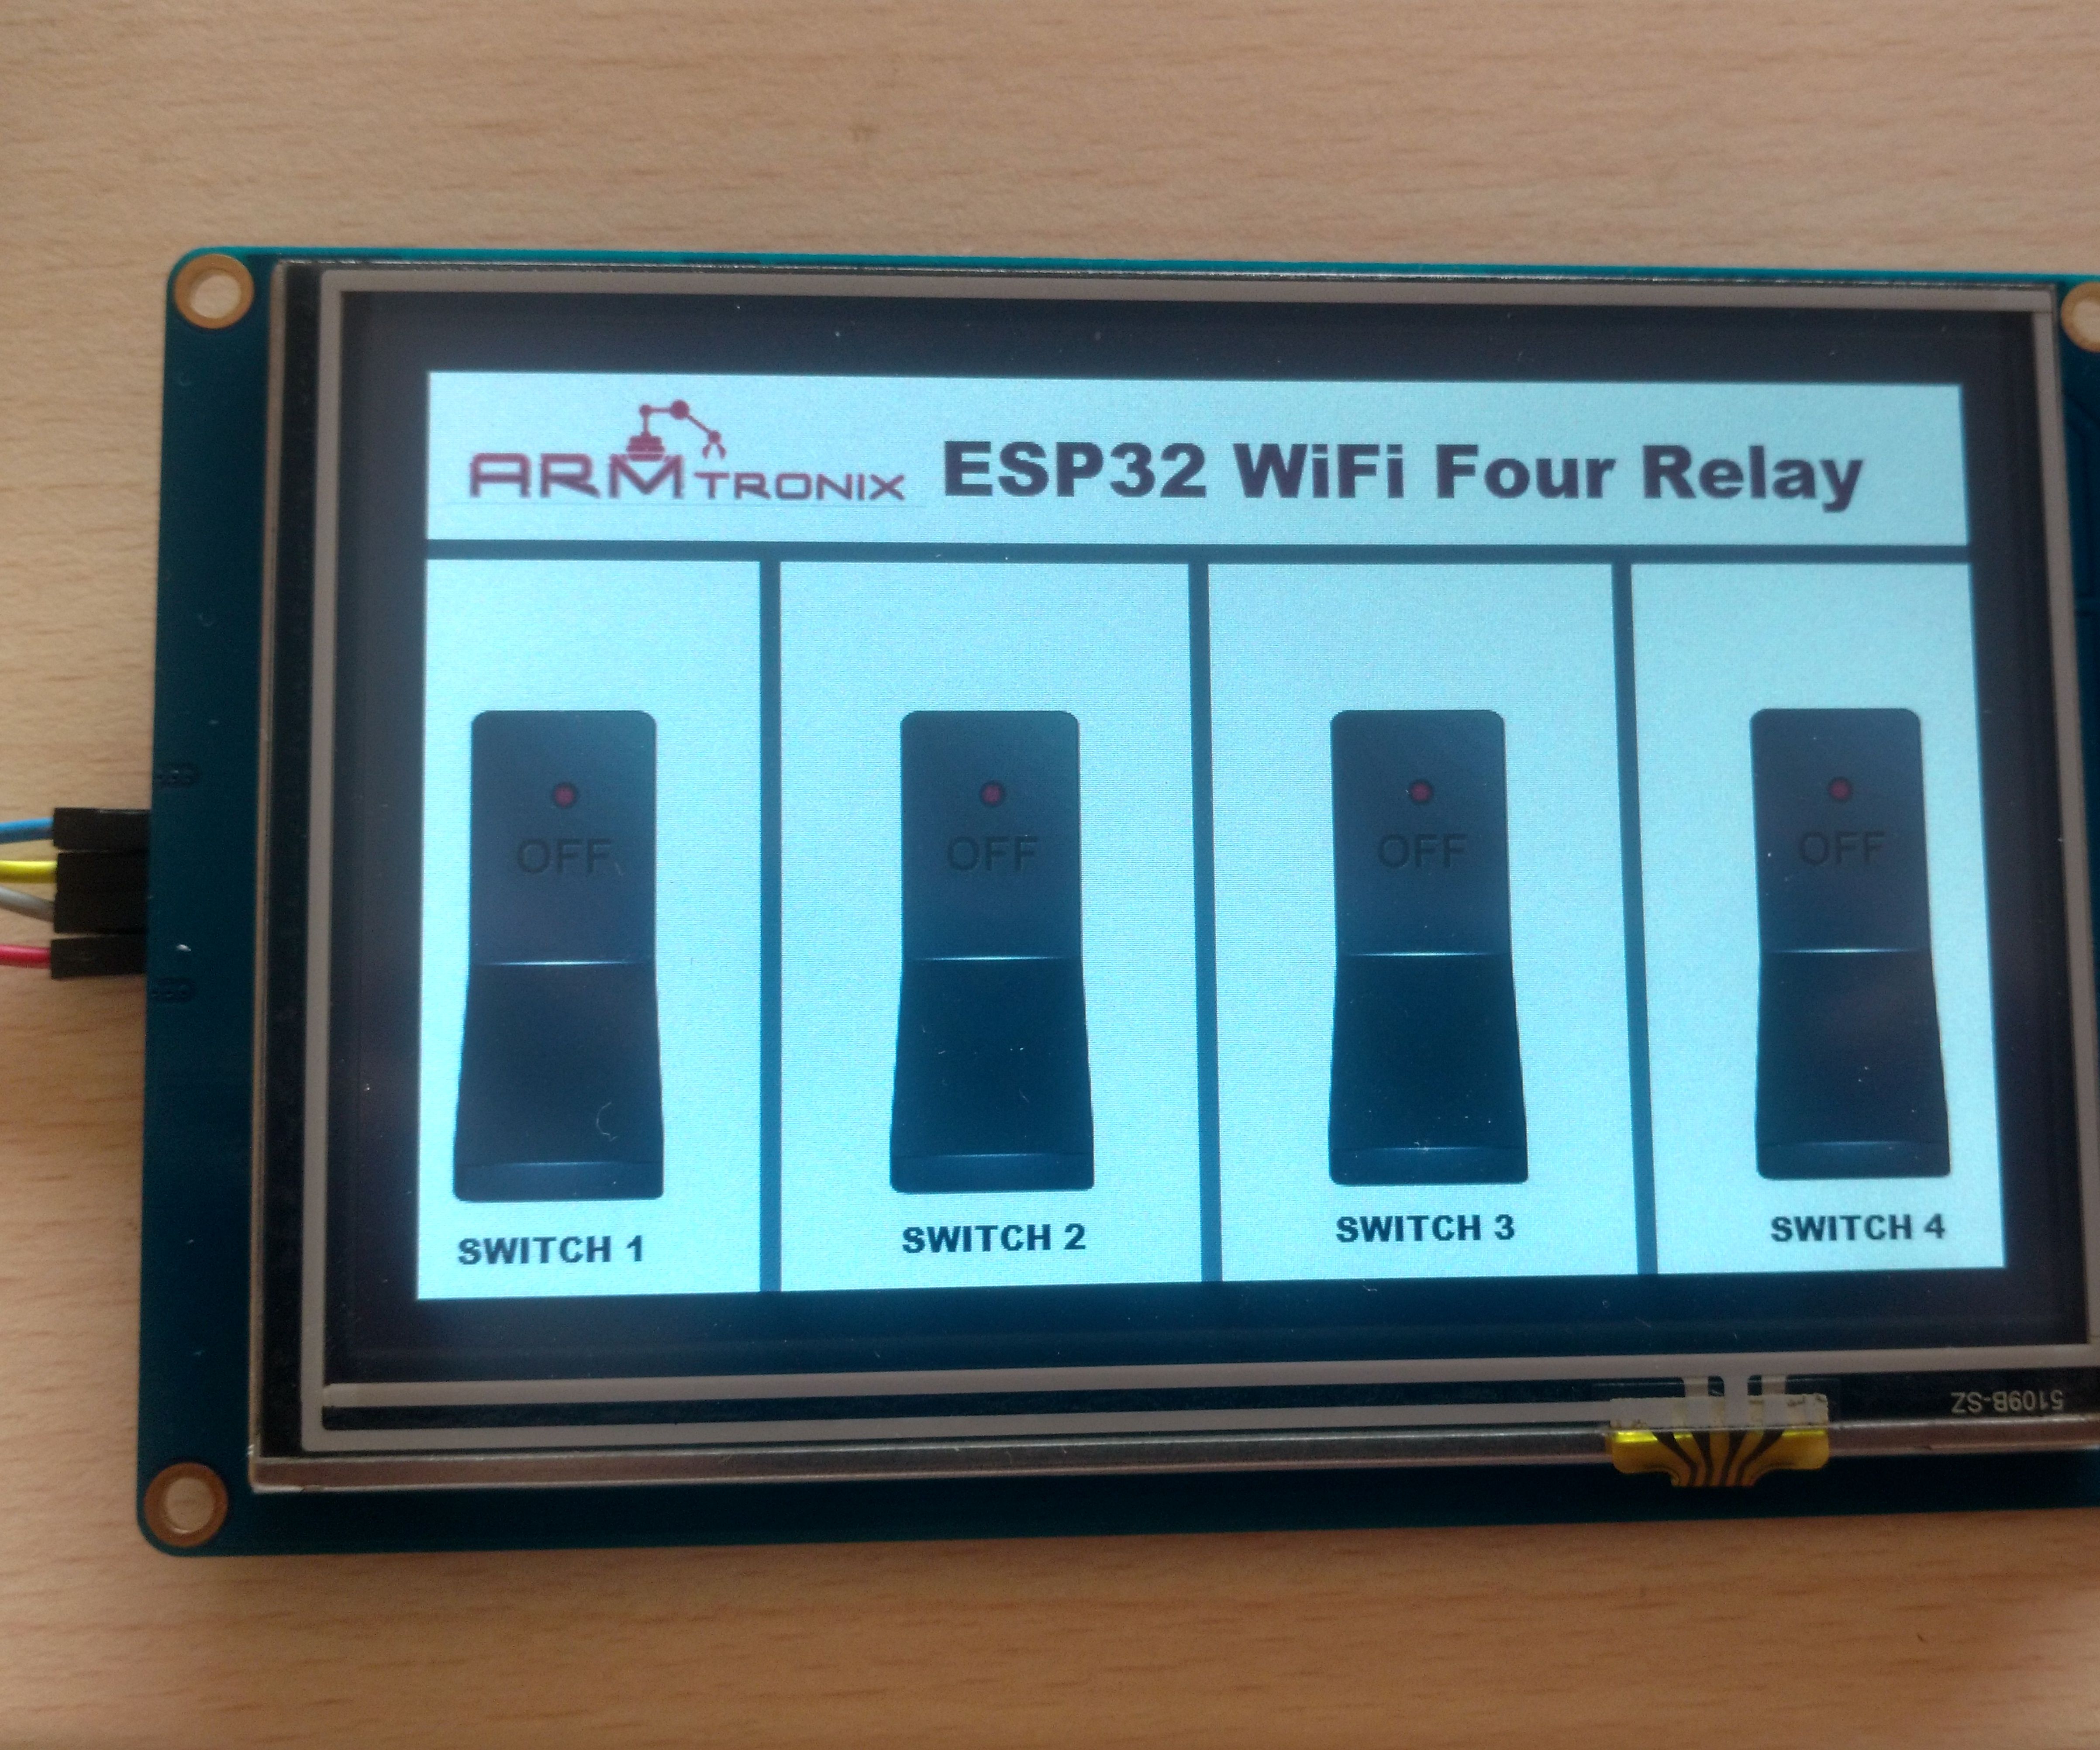 Nextion Display Interface With ESP 32 Four Relay Board